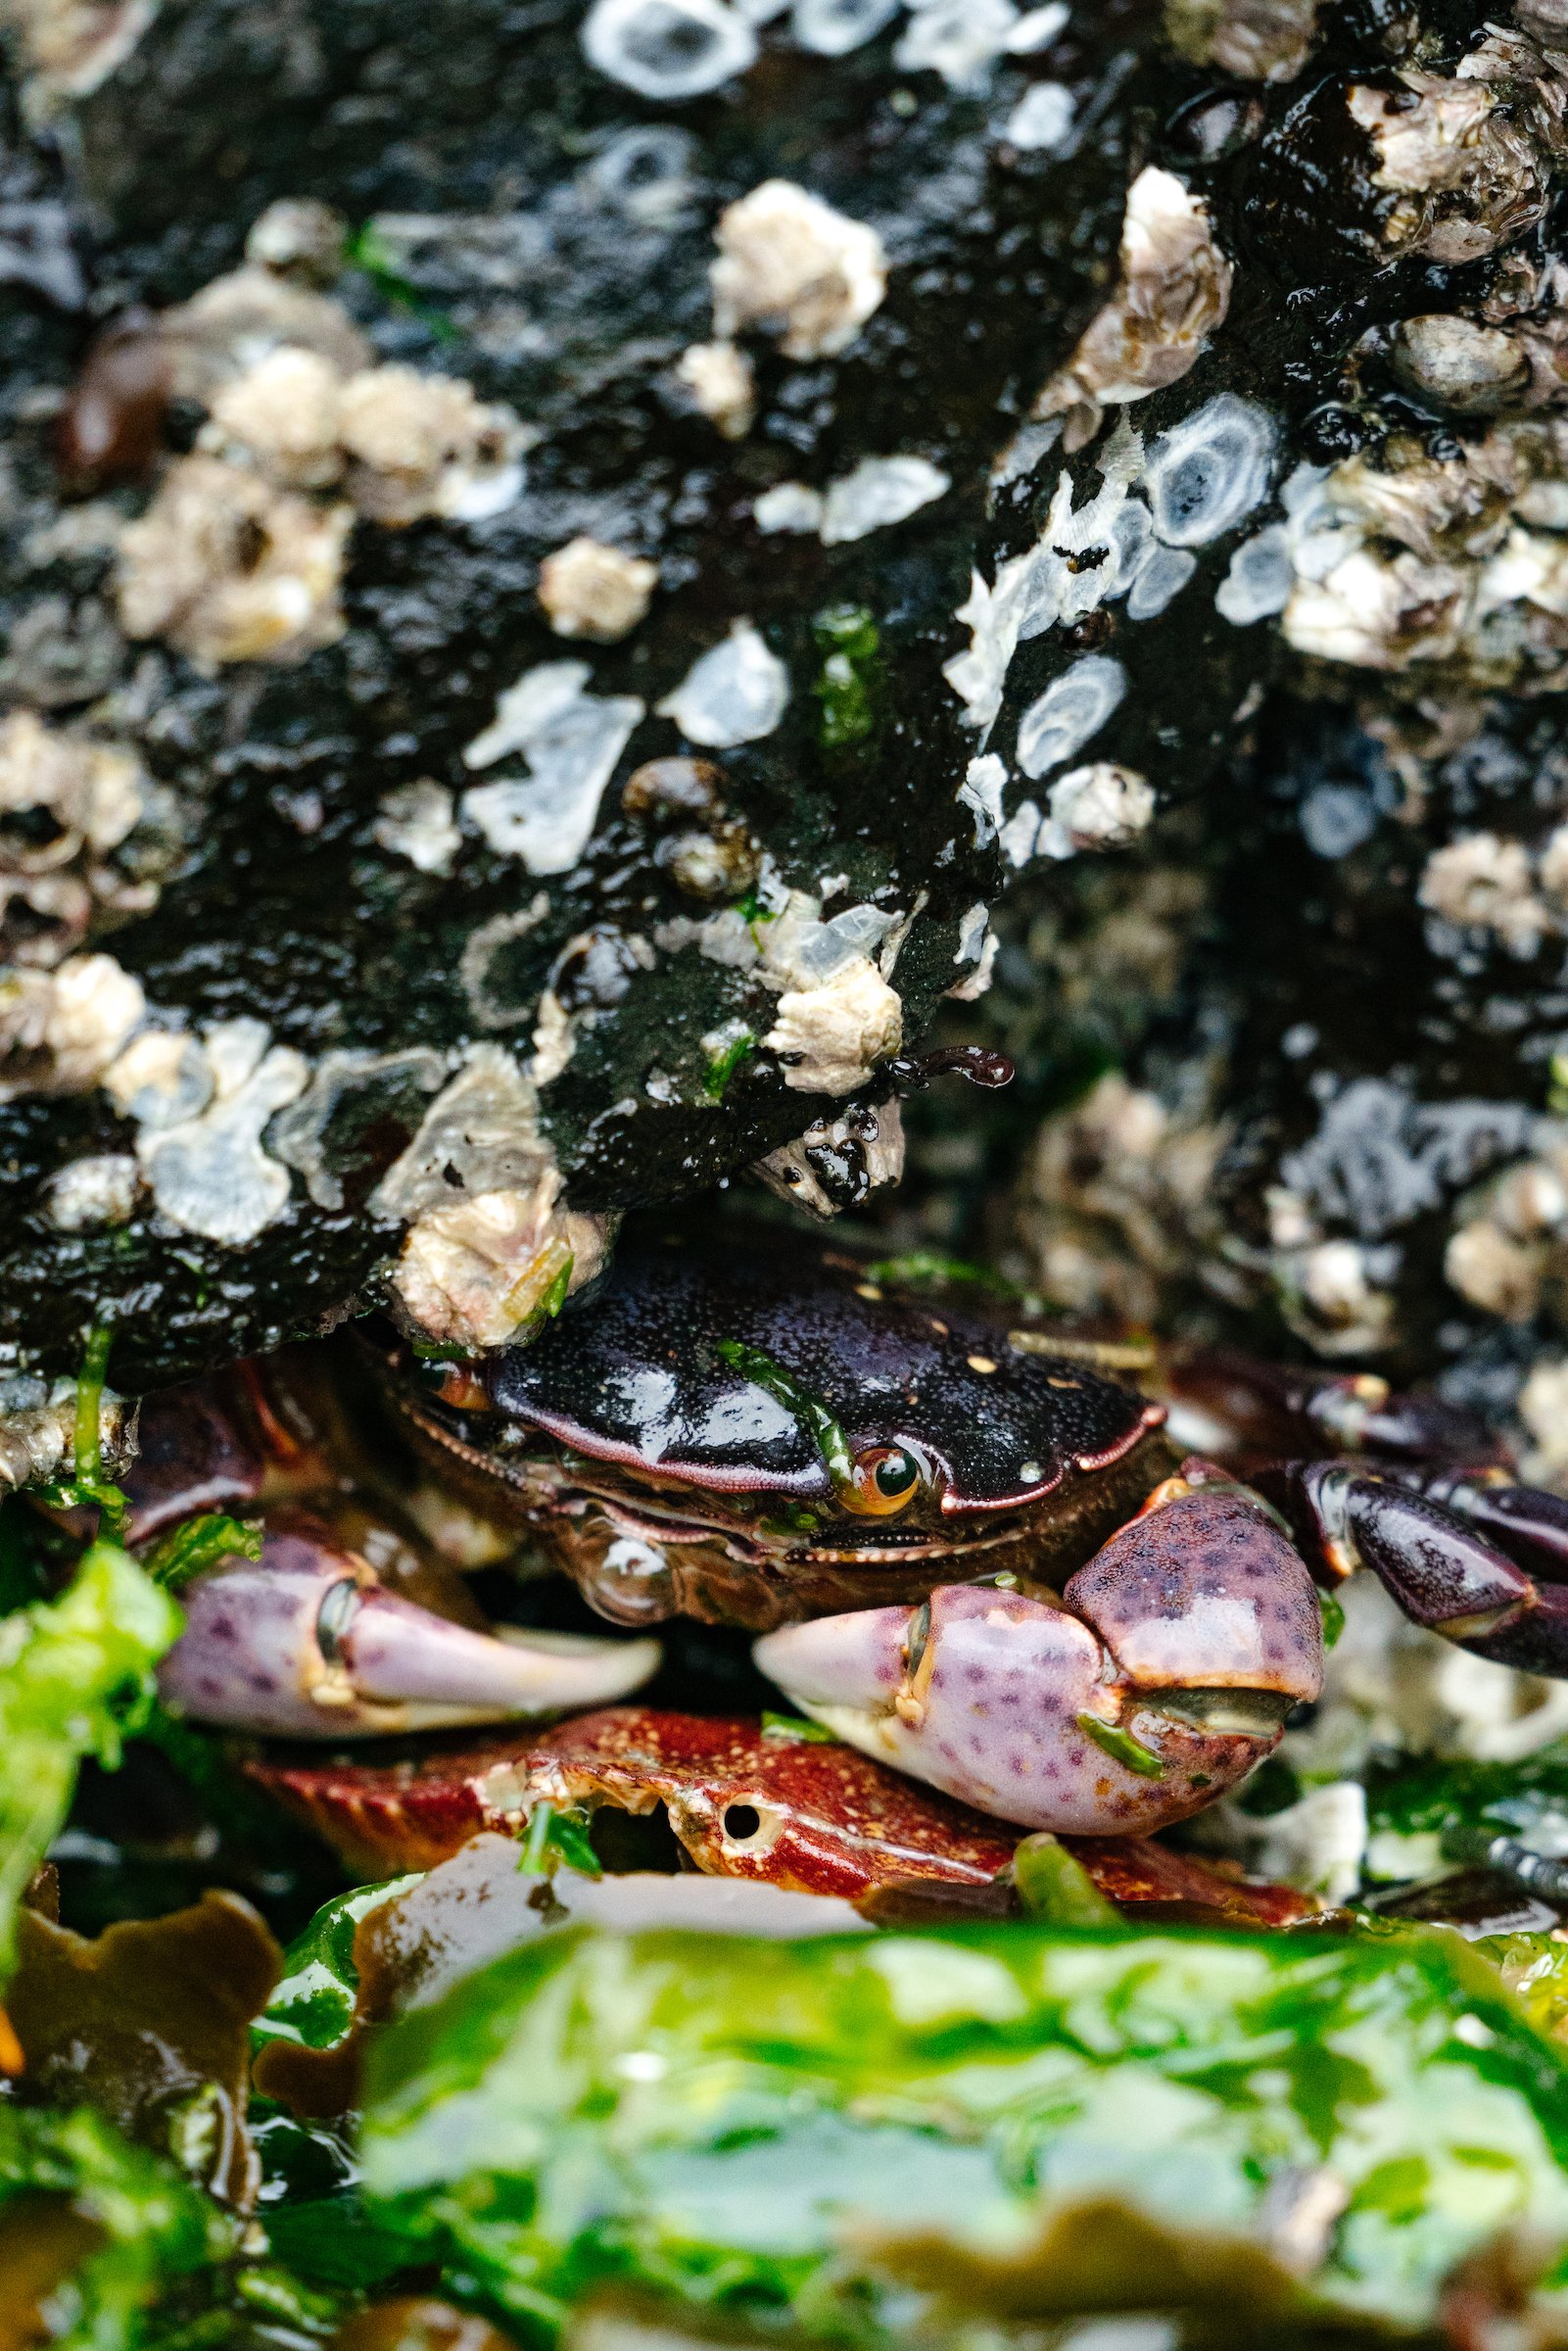 Where to go Tide Pooling near Seattle